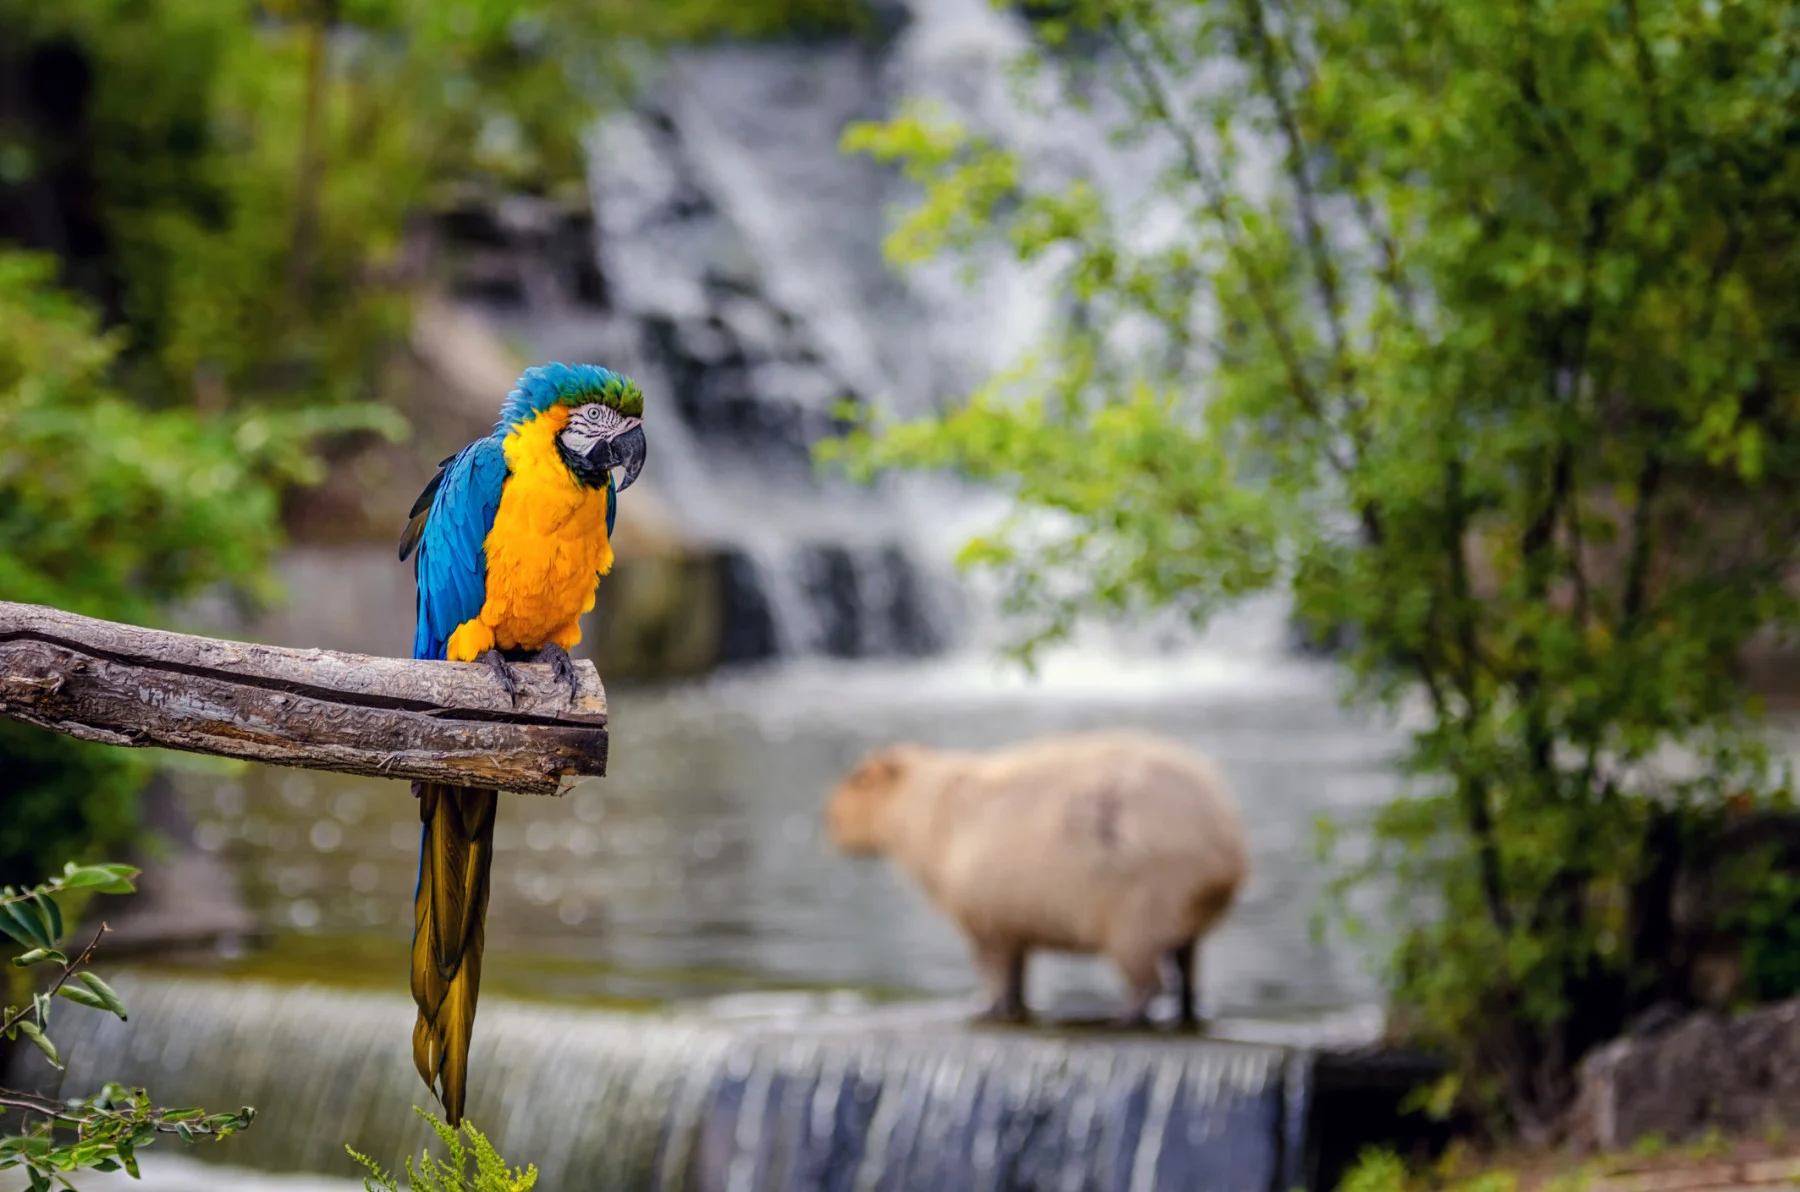 macaw and capybara in brazil (Hillary Kladke/ Moment/ Getty Images)